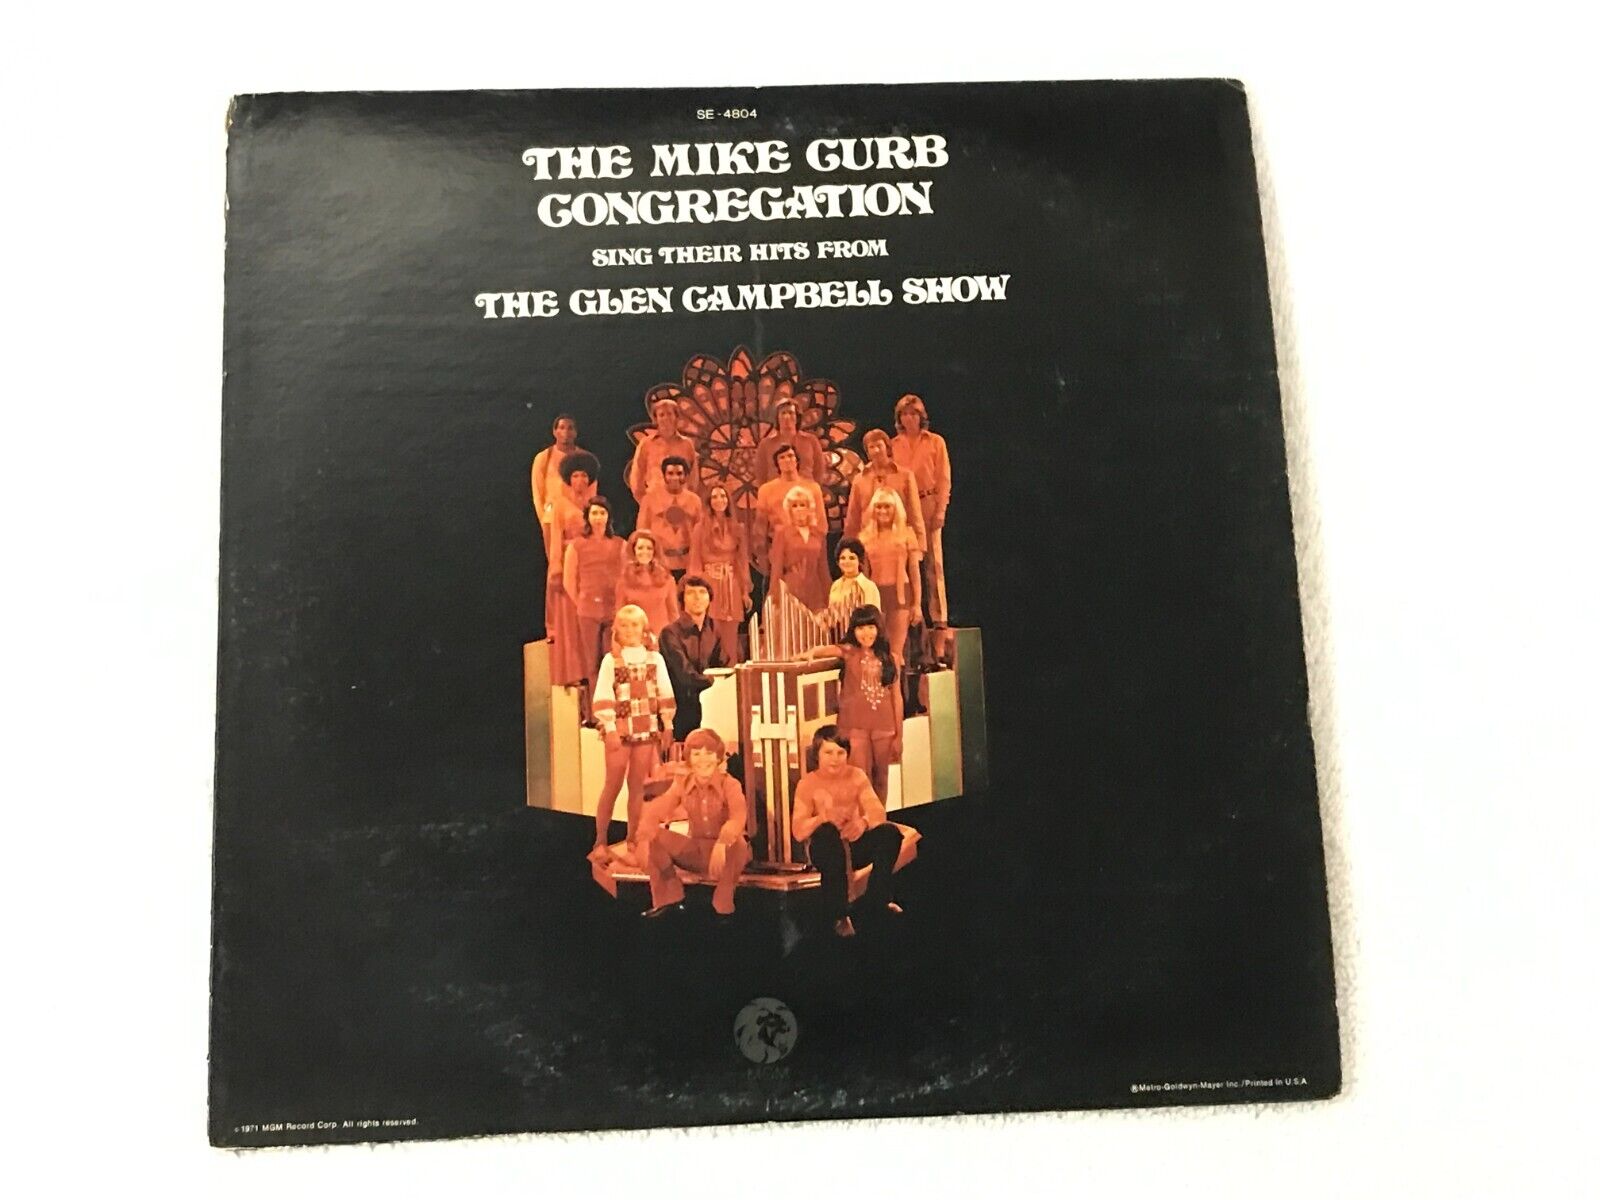 1971 MGM - The Mike Curb Congregation DJ Promo Record -33.3 rpm- Vinyl Record